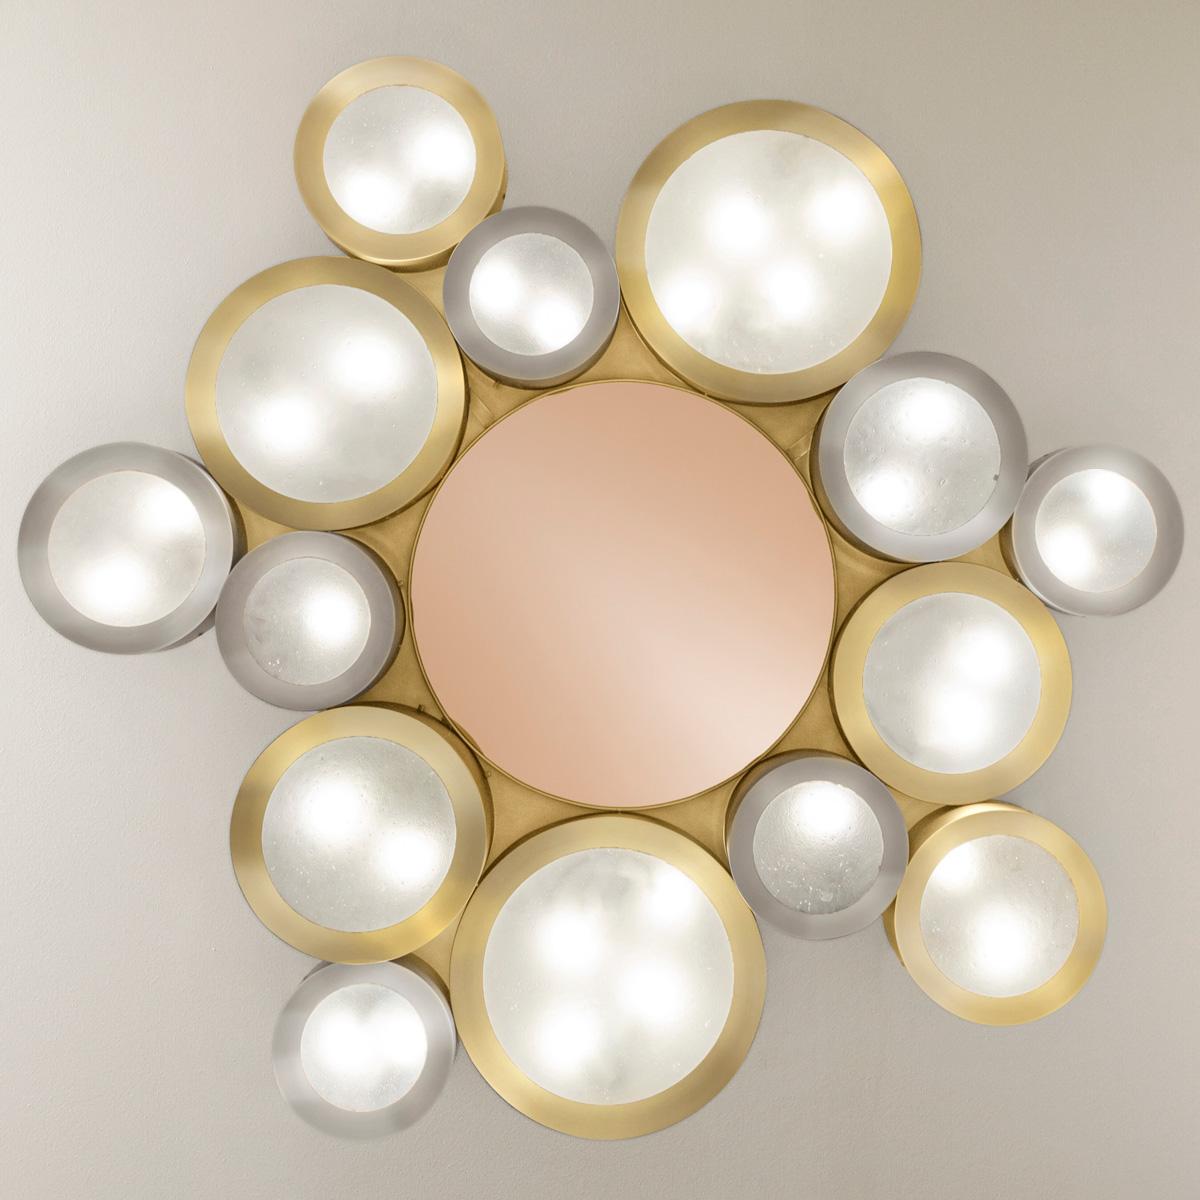 Modern Helios 66 Ceiling Light by Gaspare Asaro-Satin Brass and Satin Nickel Finish For Sale